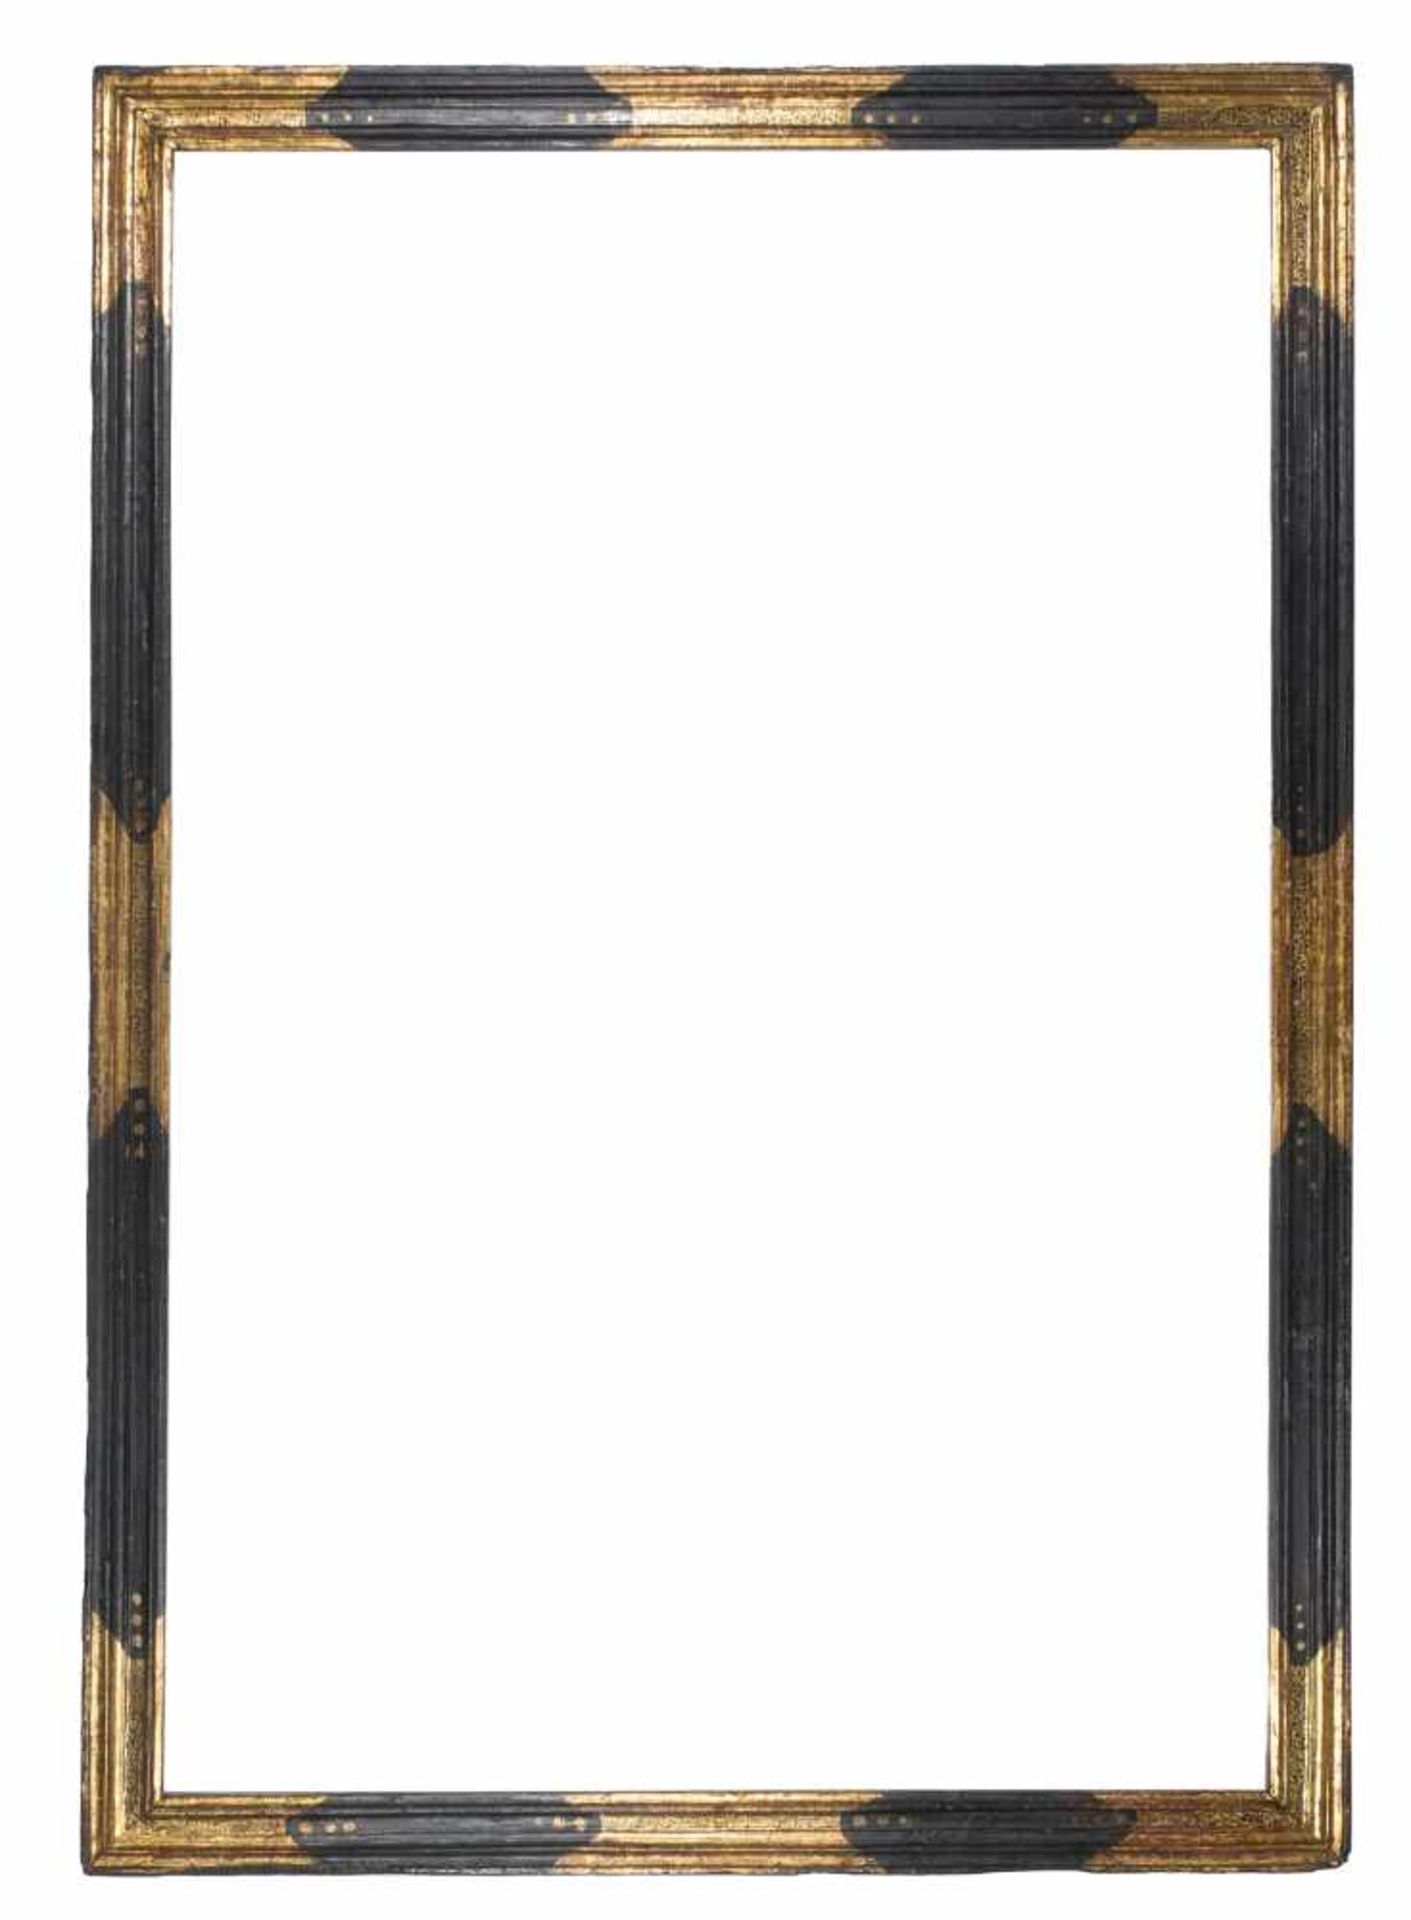 Large carved, ebonised and gilded wooden Spanish frame. 16th century.